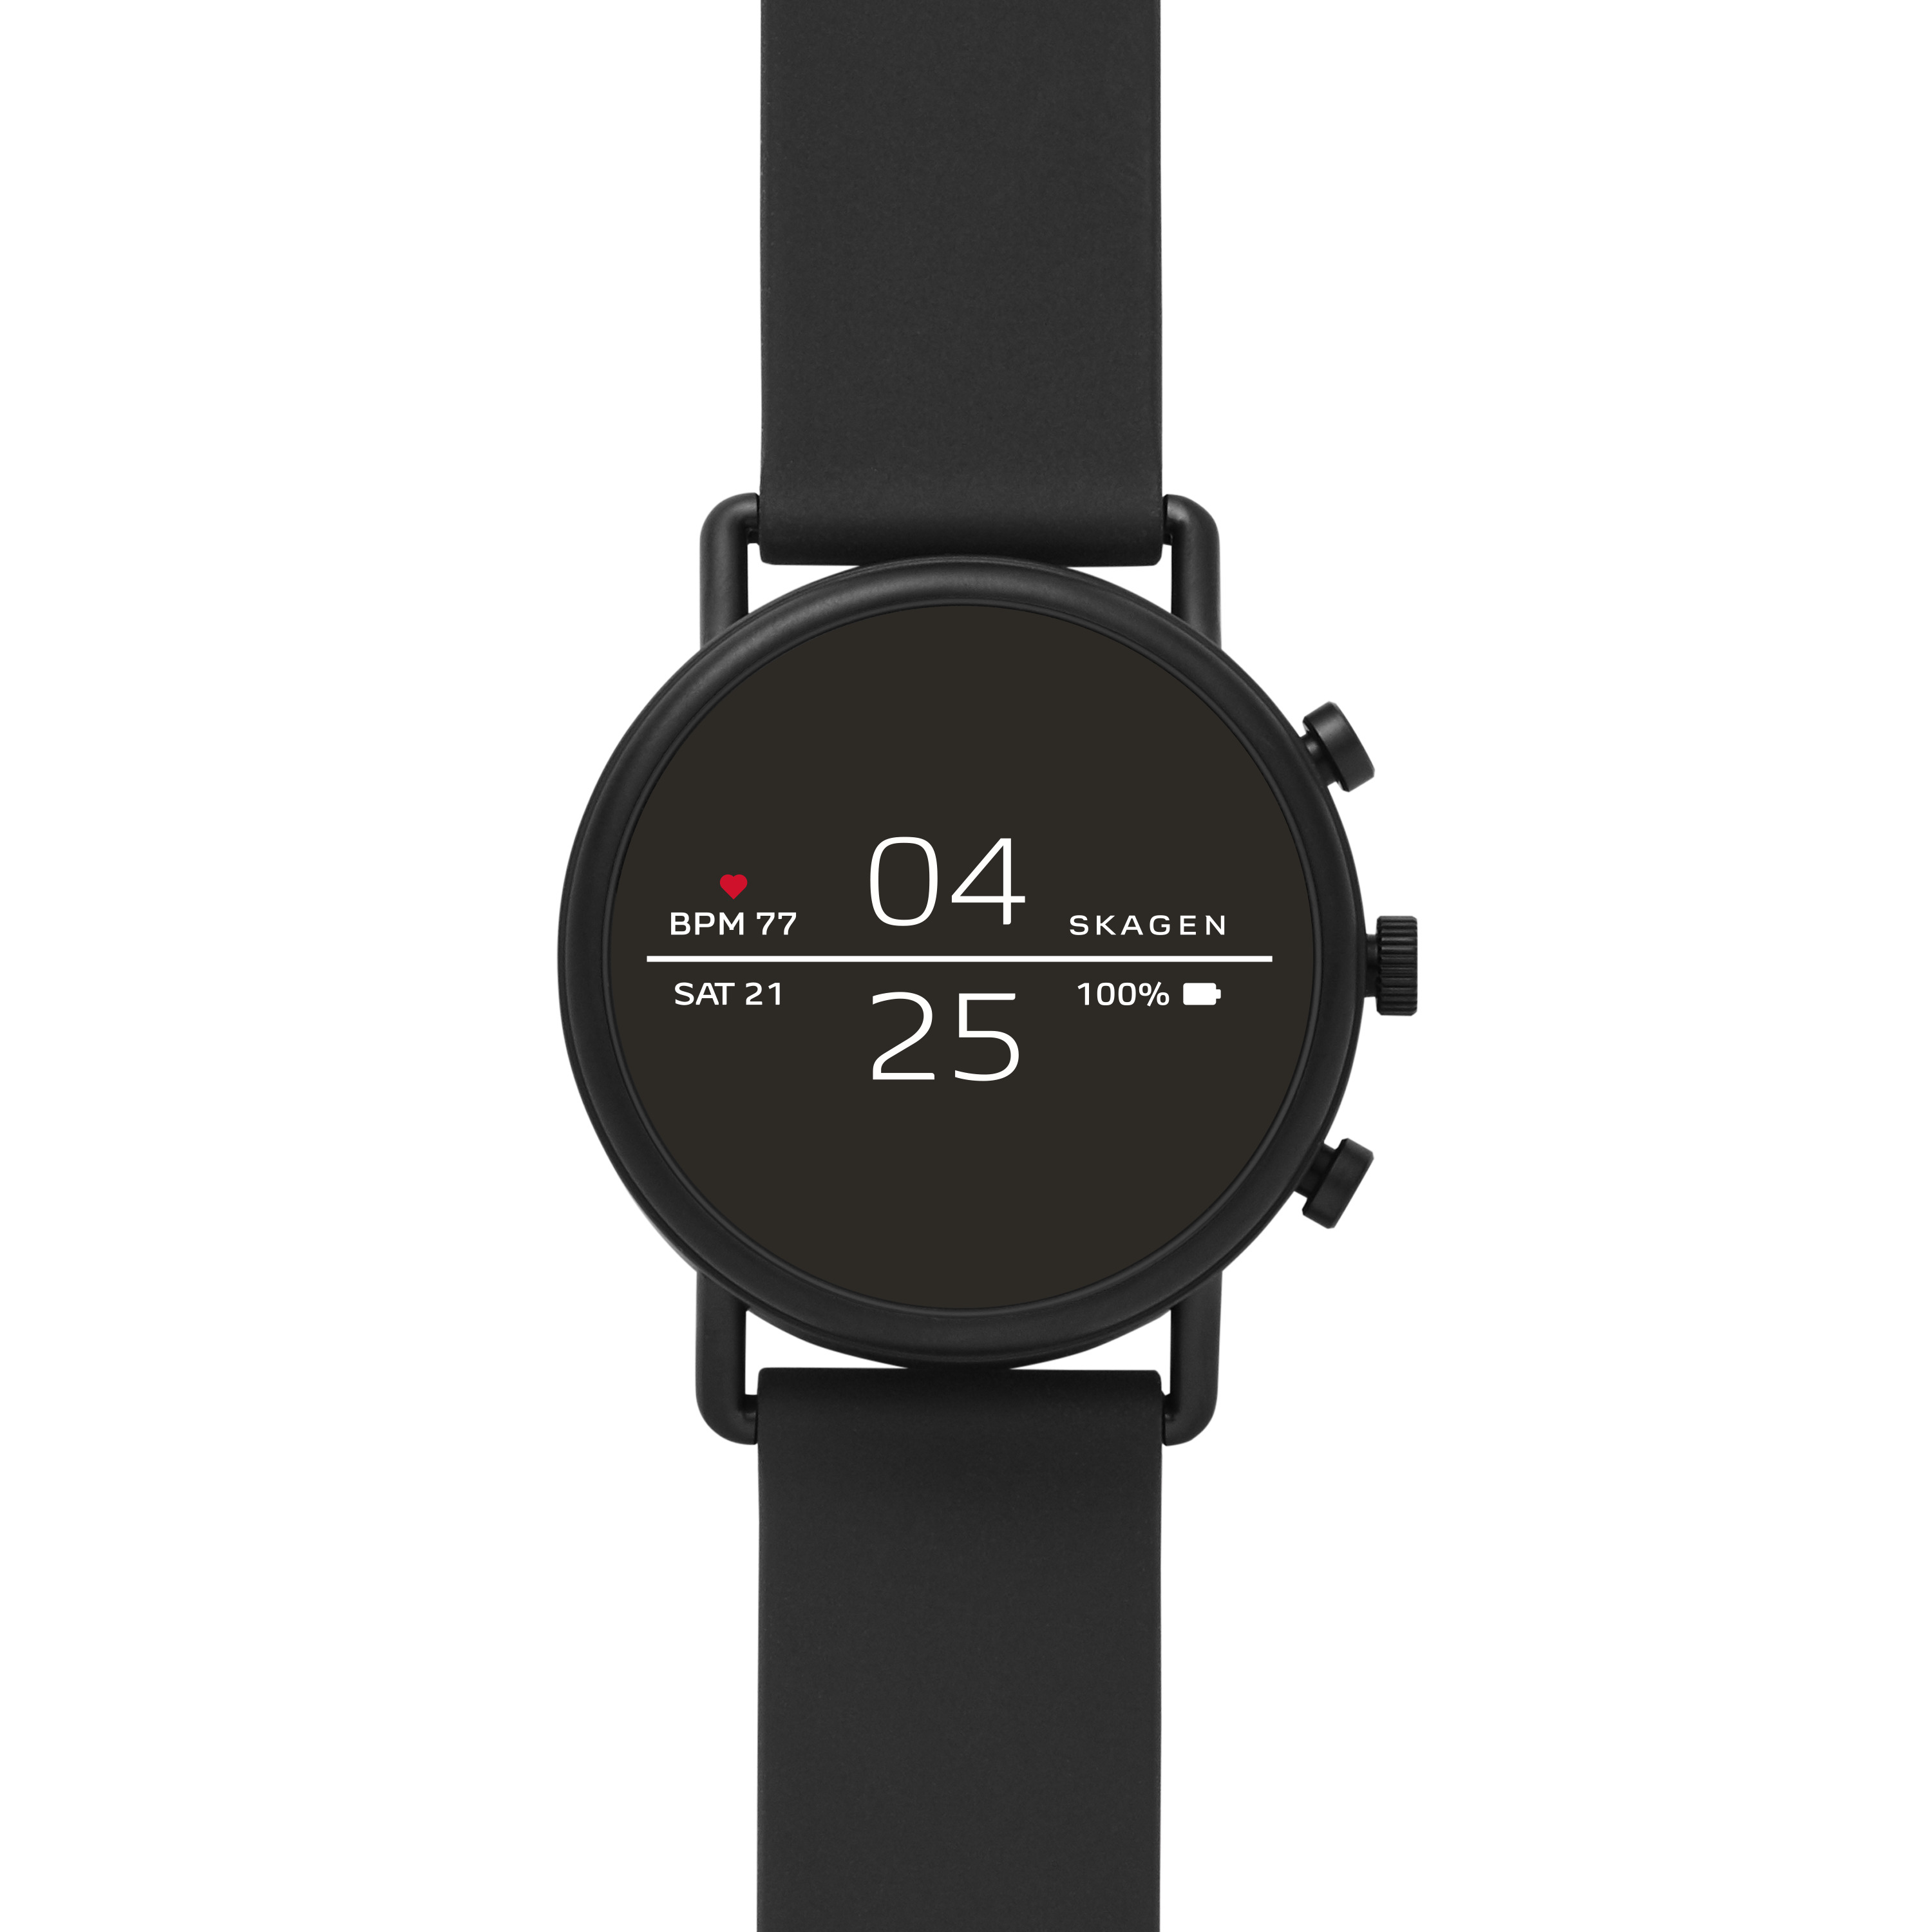 SKAGEN Falster 2 watch announced at IFA